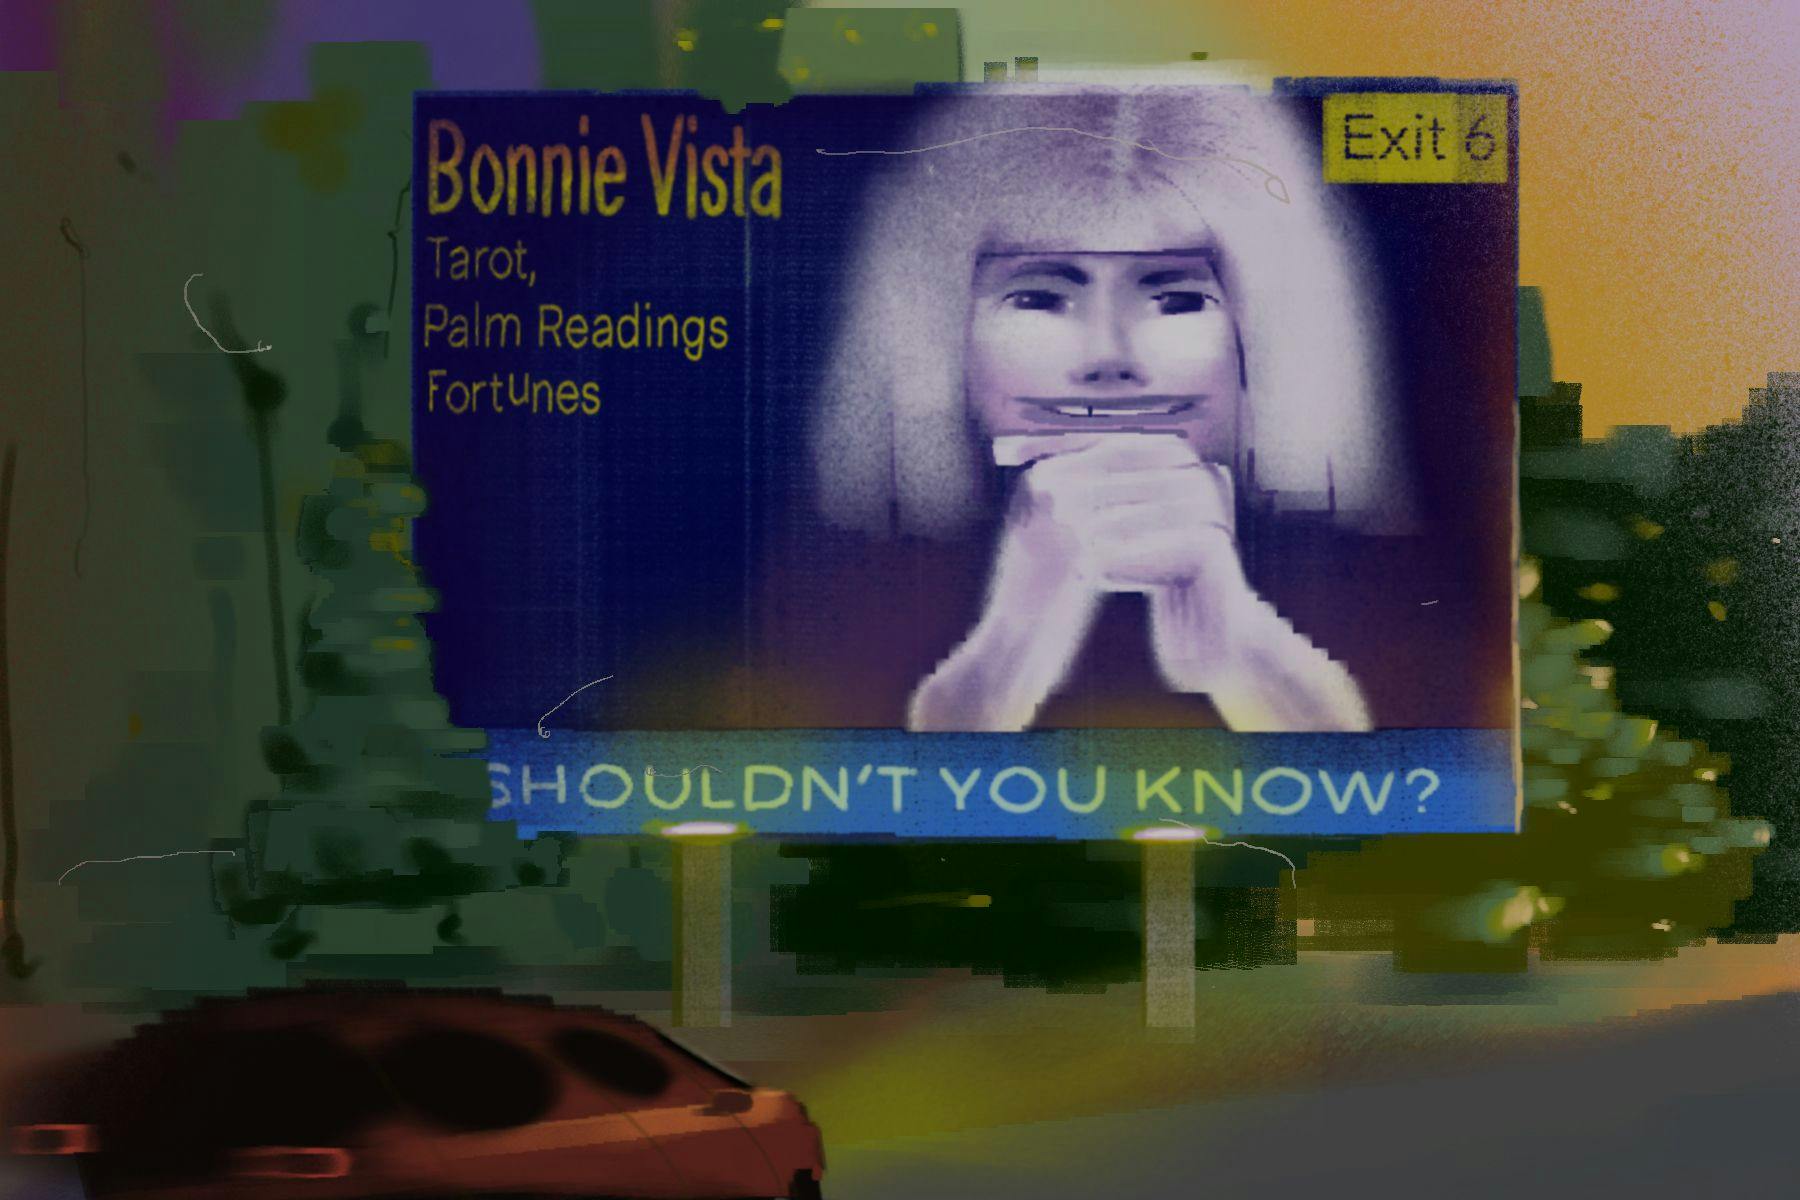 A billboard with an ominous woman that says "Bonnie Vist: tarot, palm readings, fortunes. Shouldn't you know?"